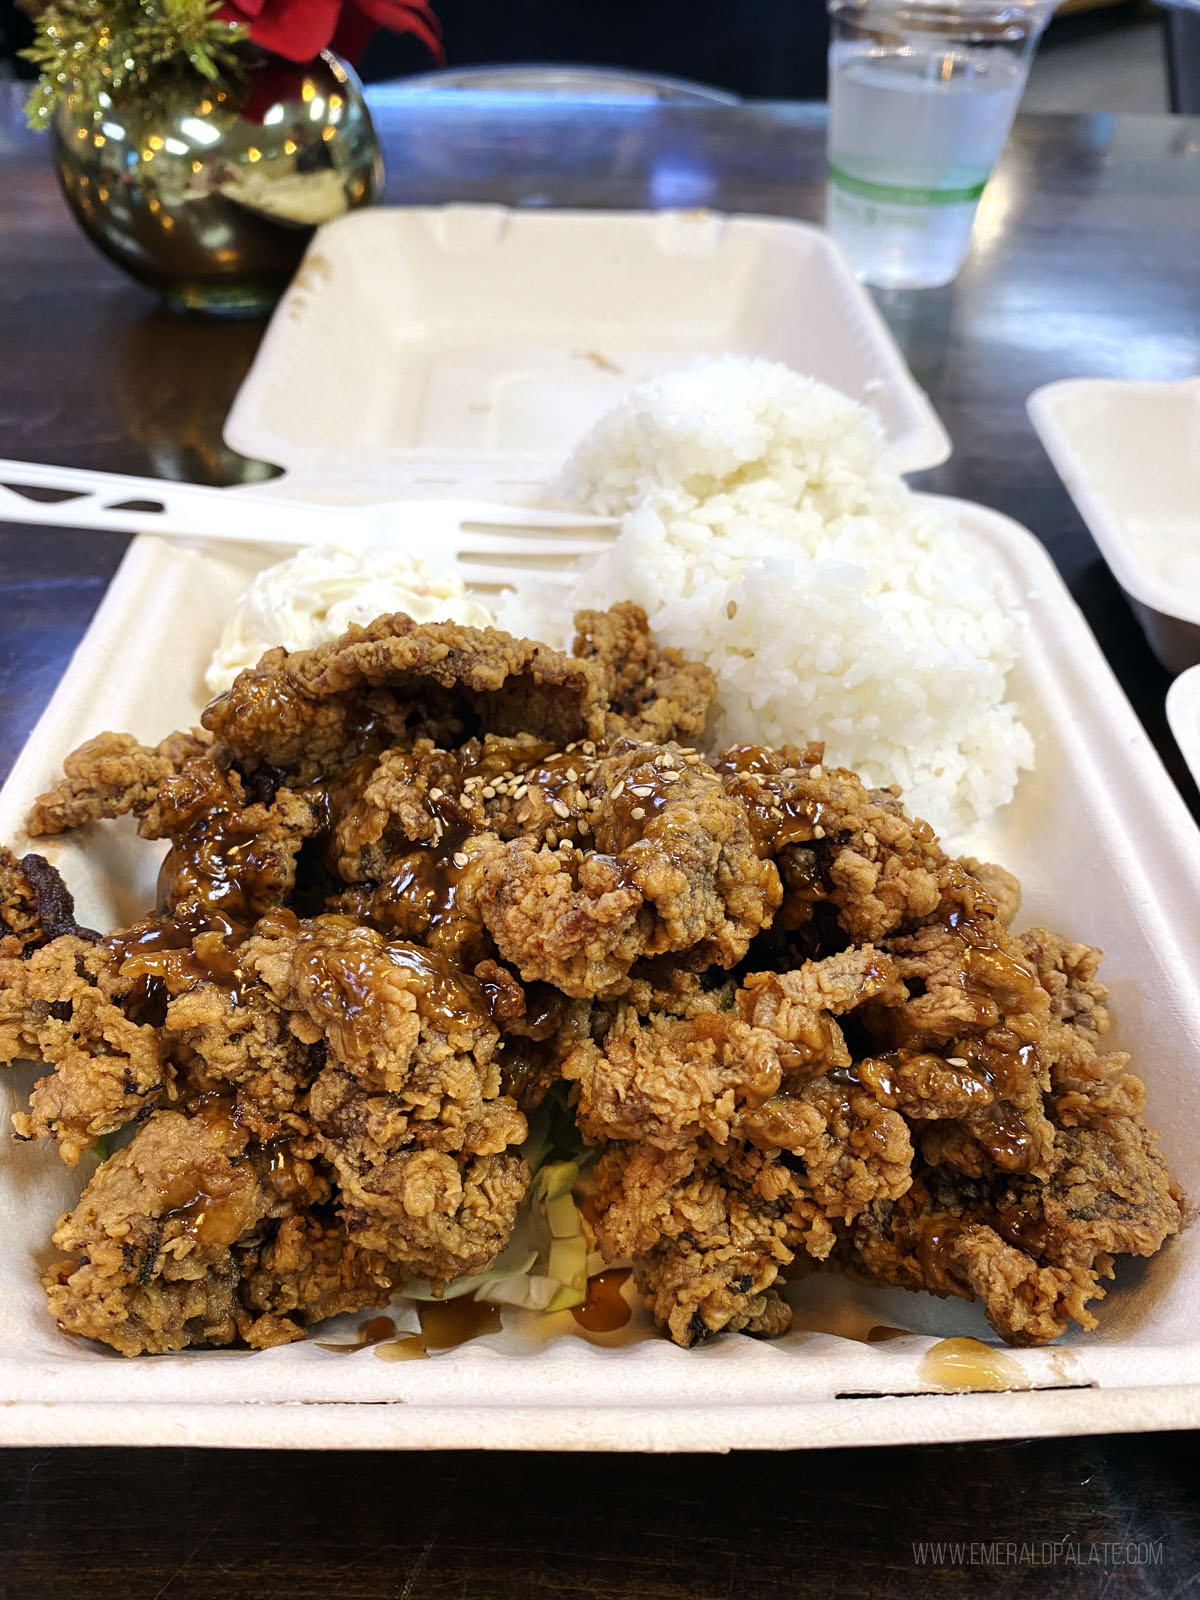 breaded teriyaki chicken from one of the places where locals eat on Maui